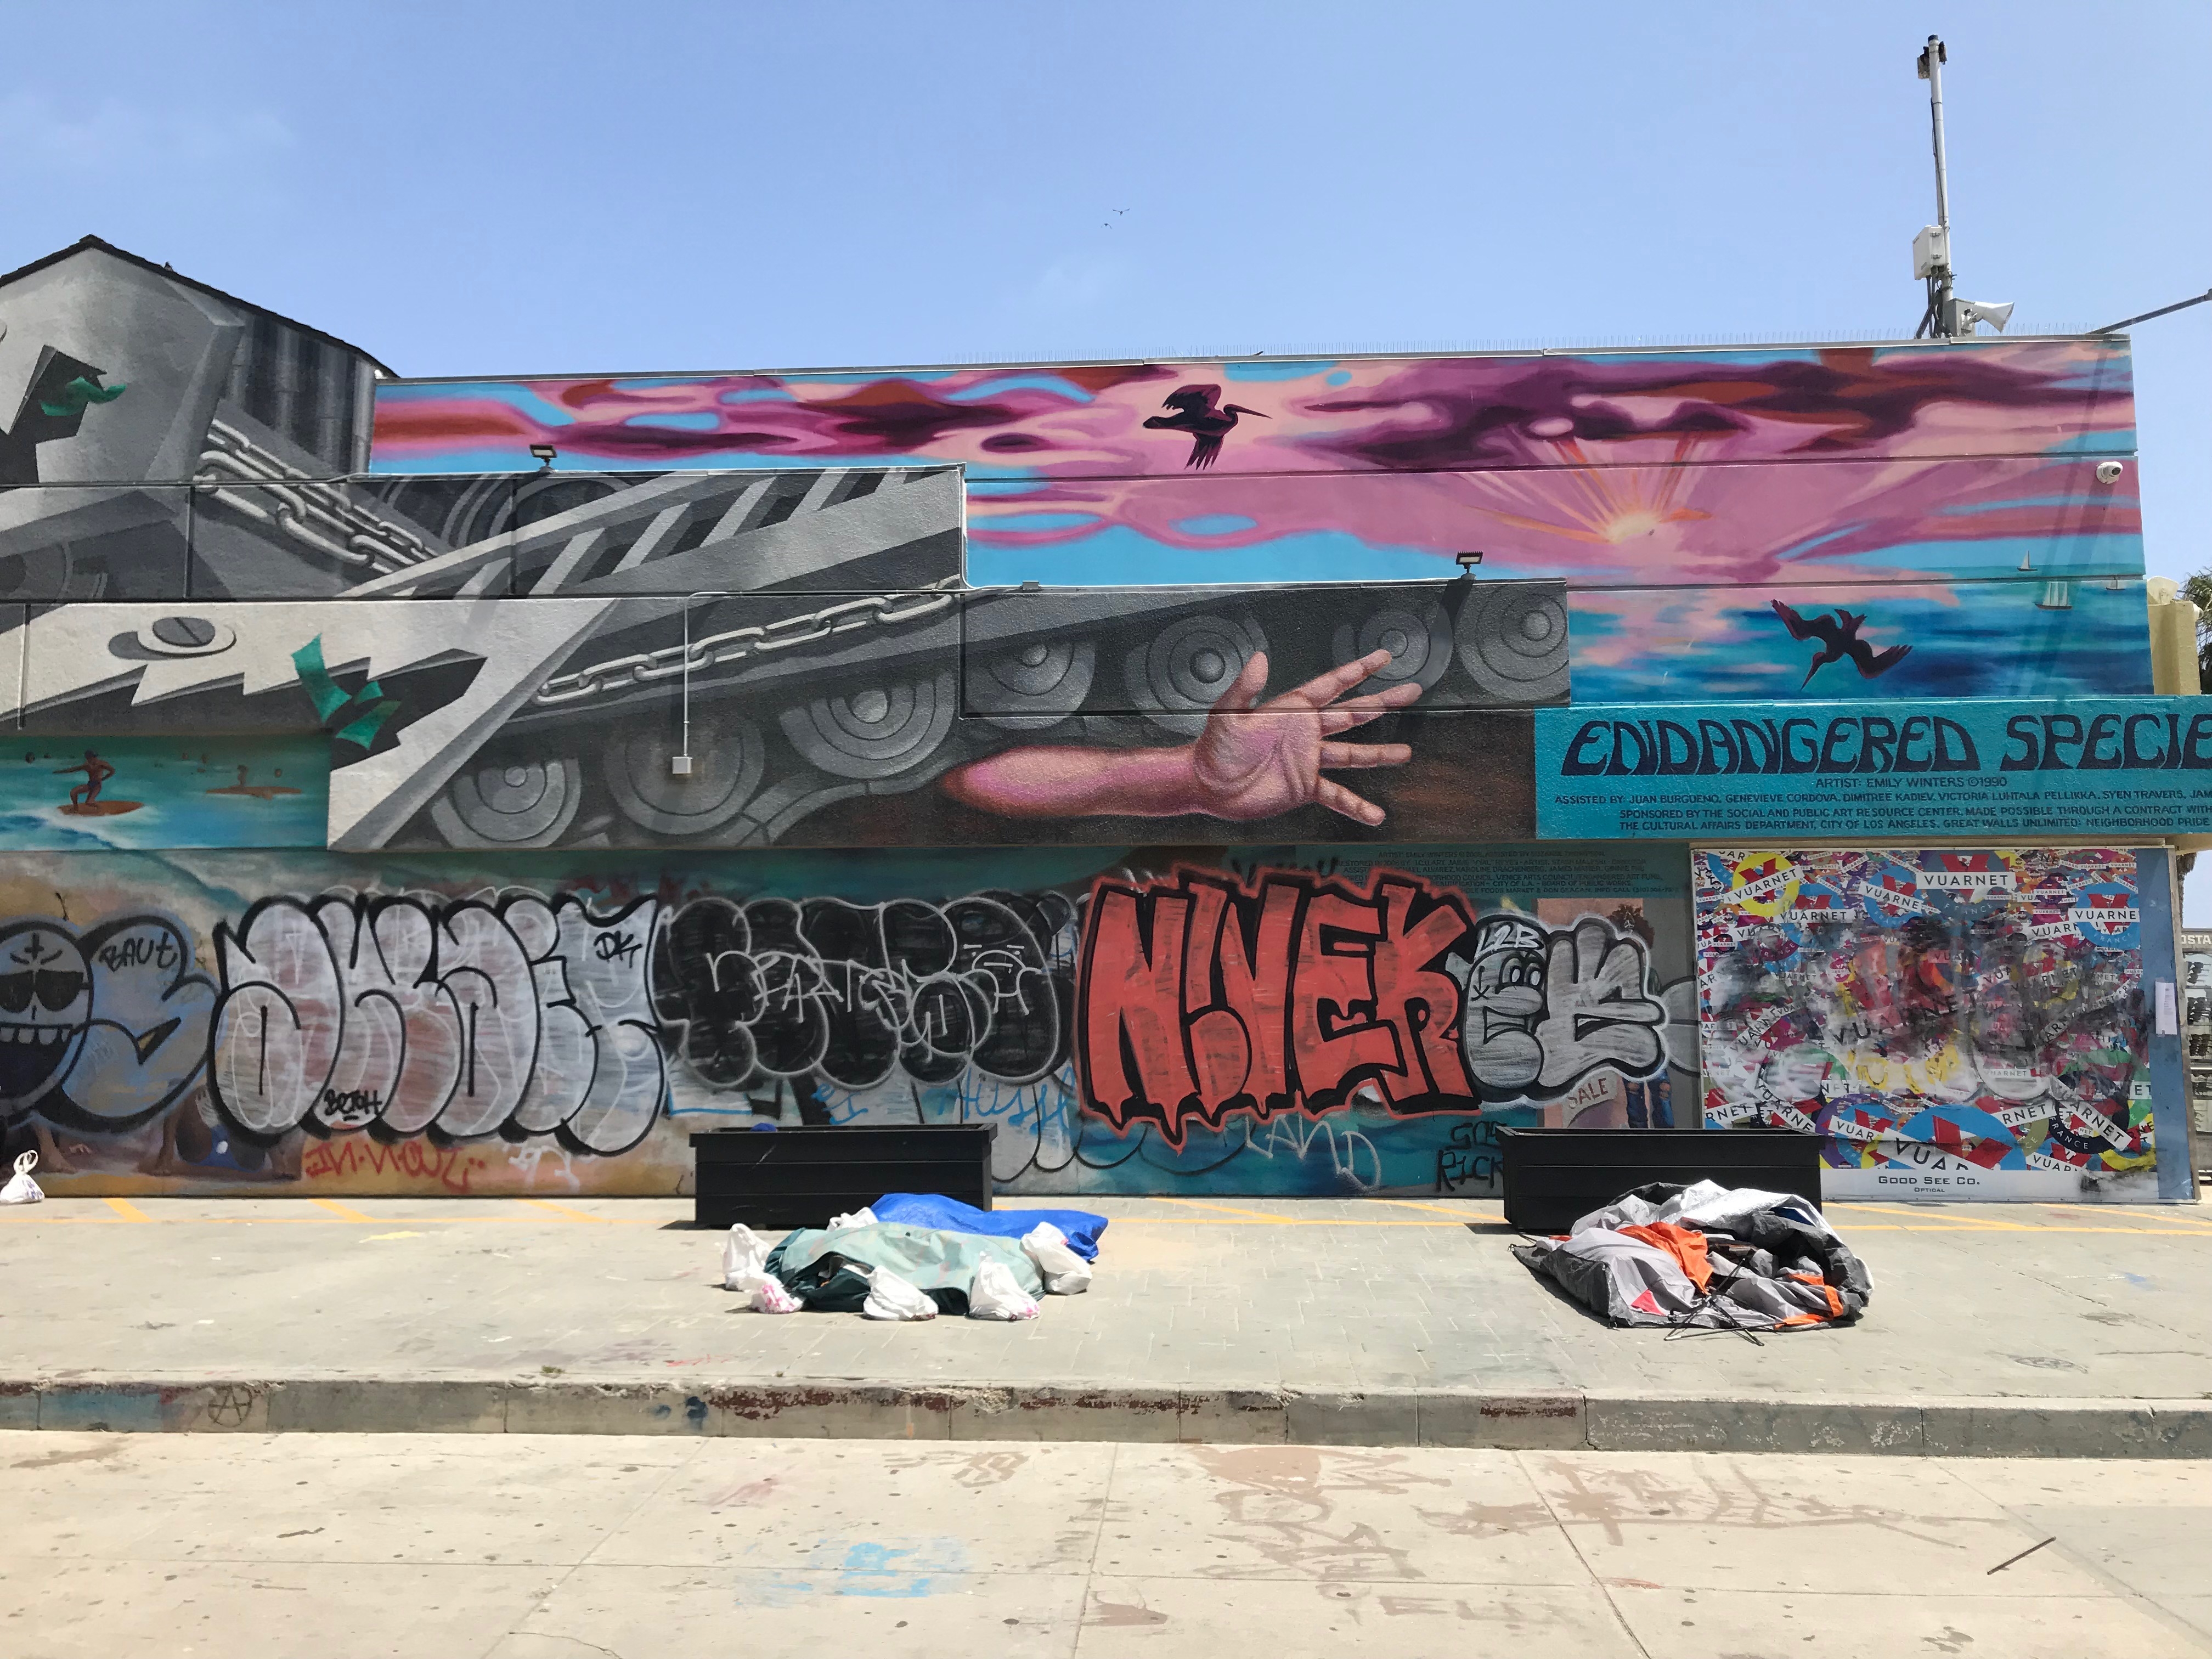 Venice Boardwalk Mural ‘Endangered Species’ by Emily Winters to Receive Needed Restoration